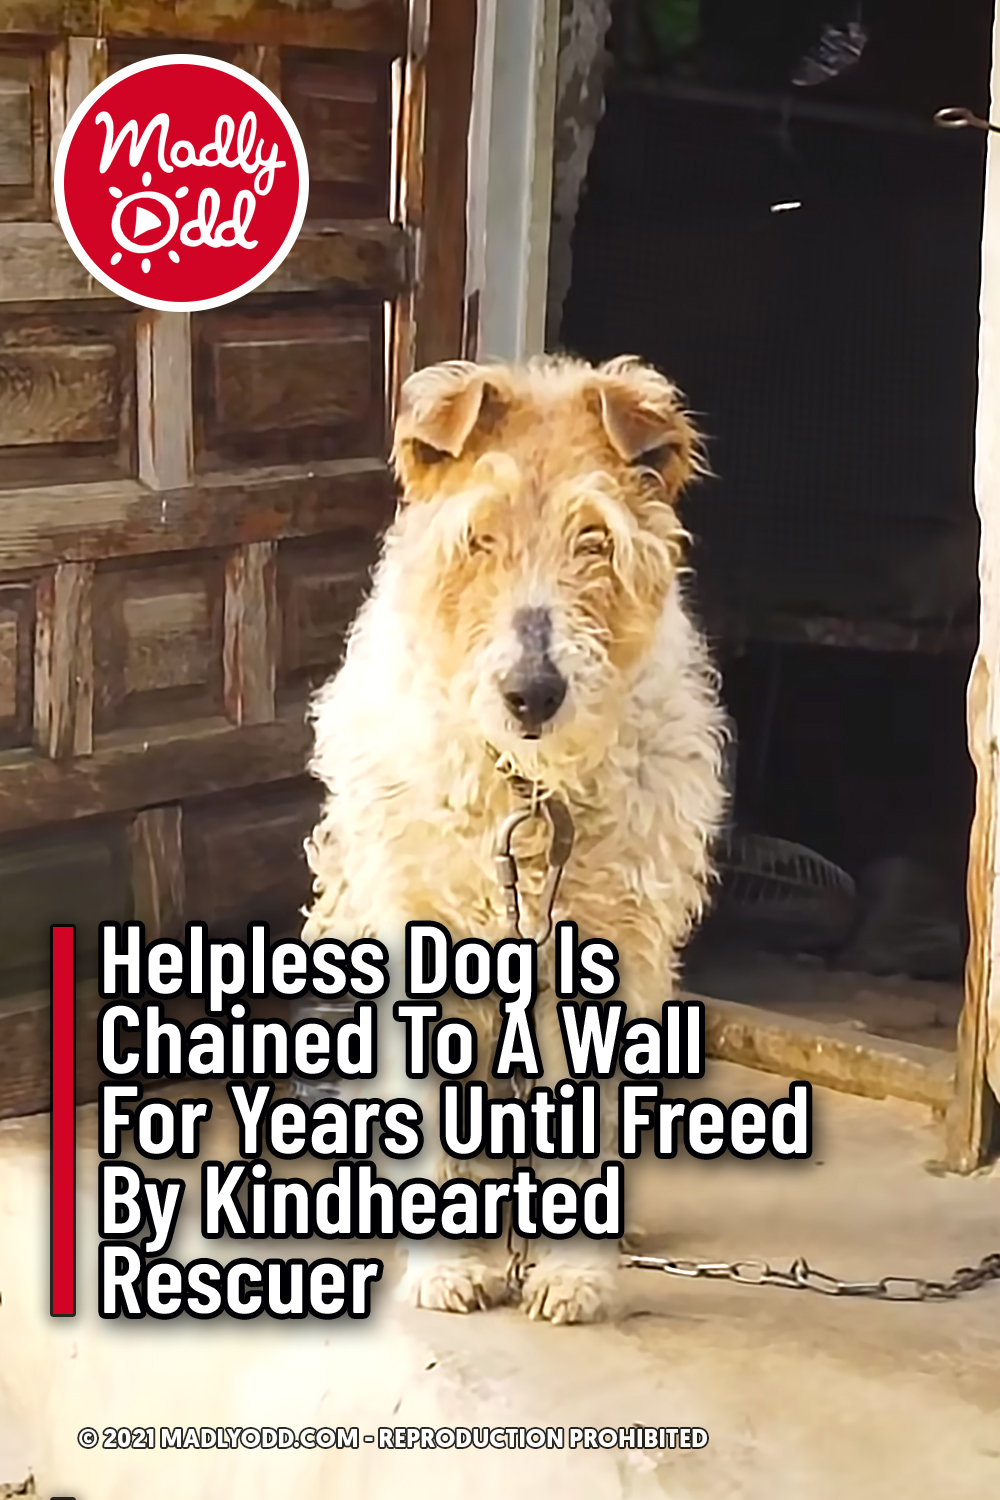 Helpless Dog Is Chained To A Wall For Years Until Freed By Kindhearted Rescuer